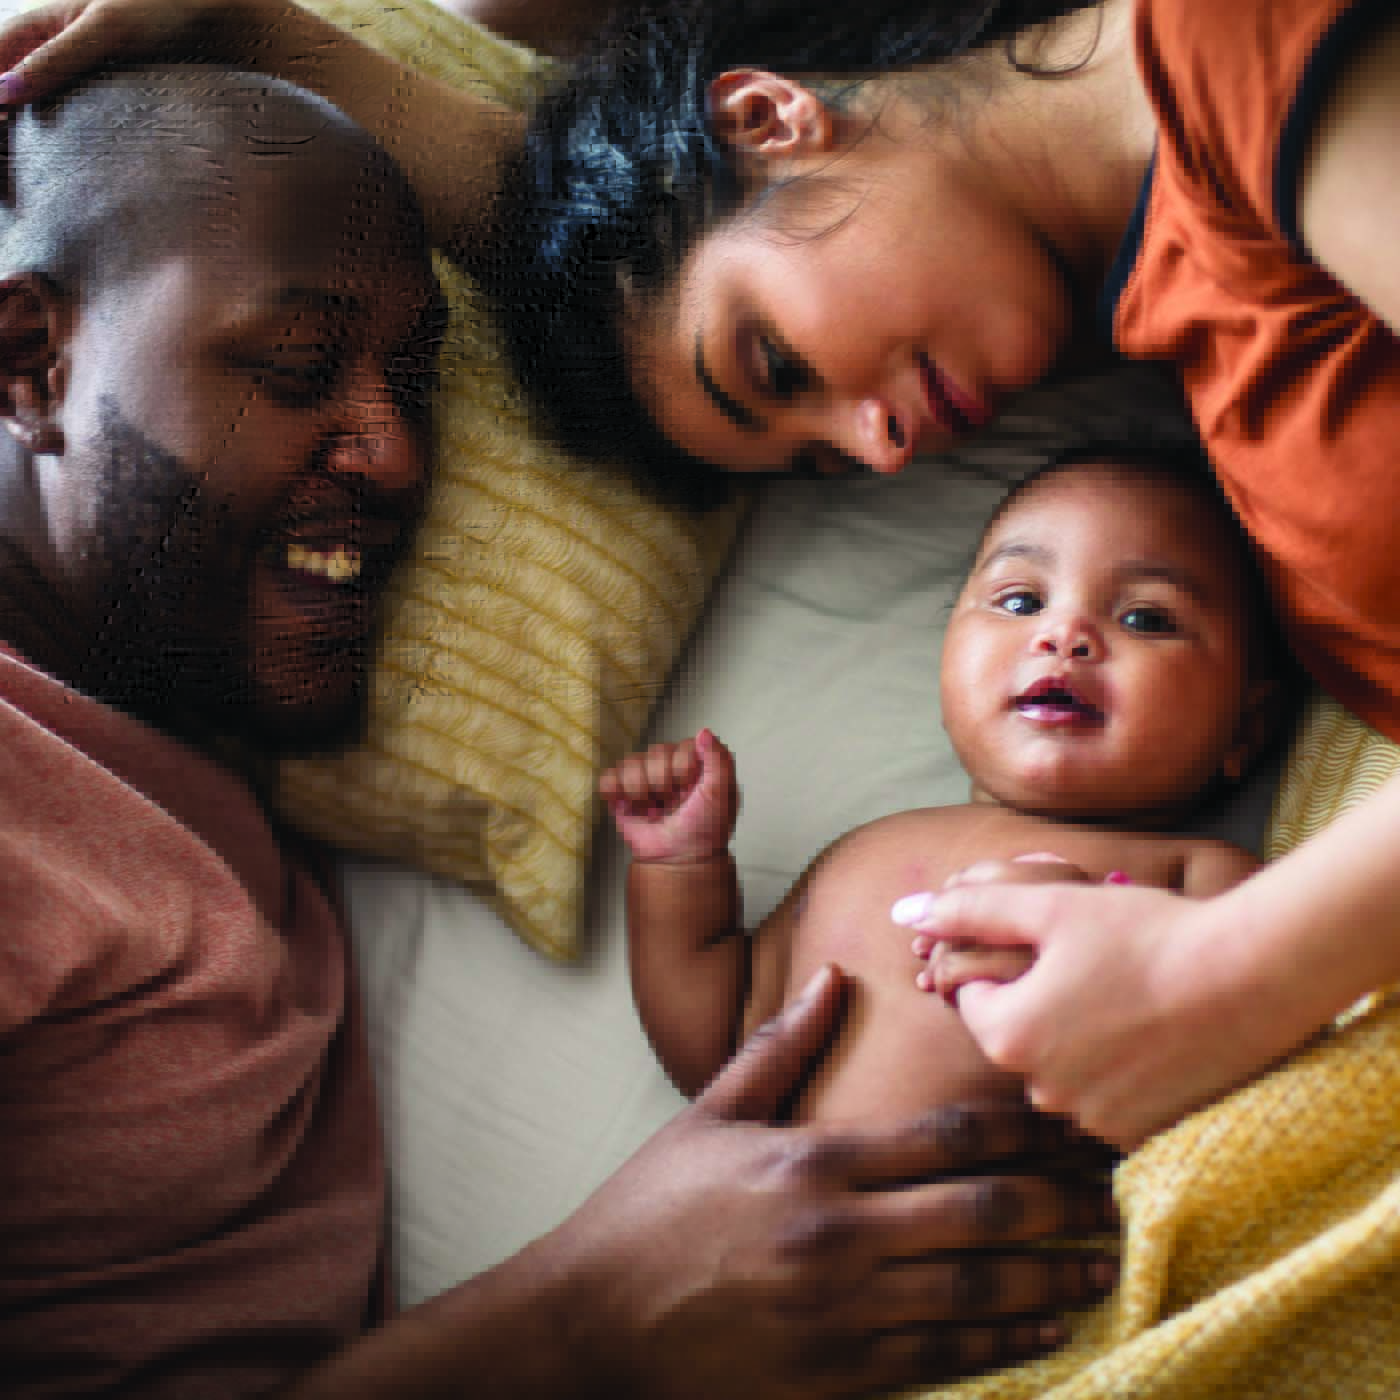 Parents who are lying down in bed, their heads on a pillow, are looking at and smiling at their infant child lying between them. The mother is holding the infant's hand and the father has his hand on the infant's belly.